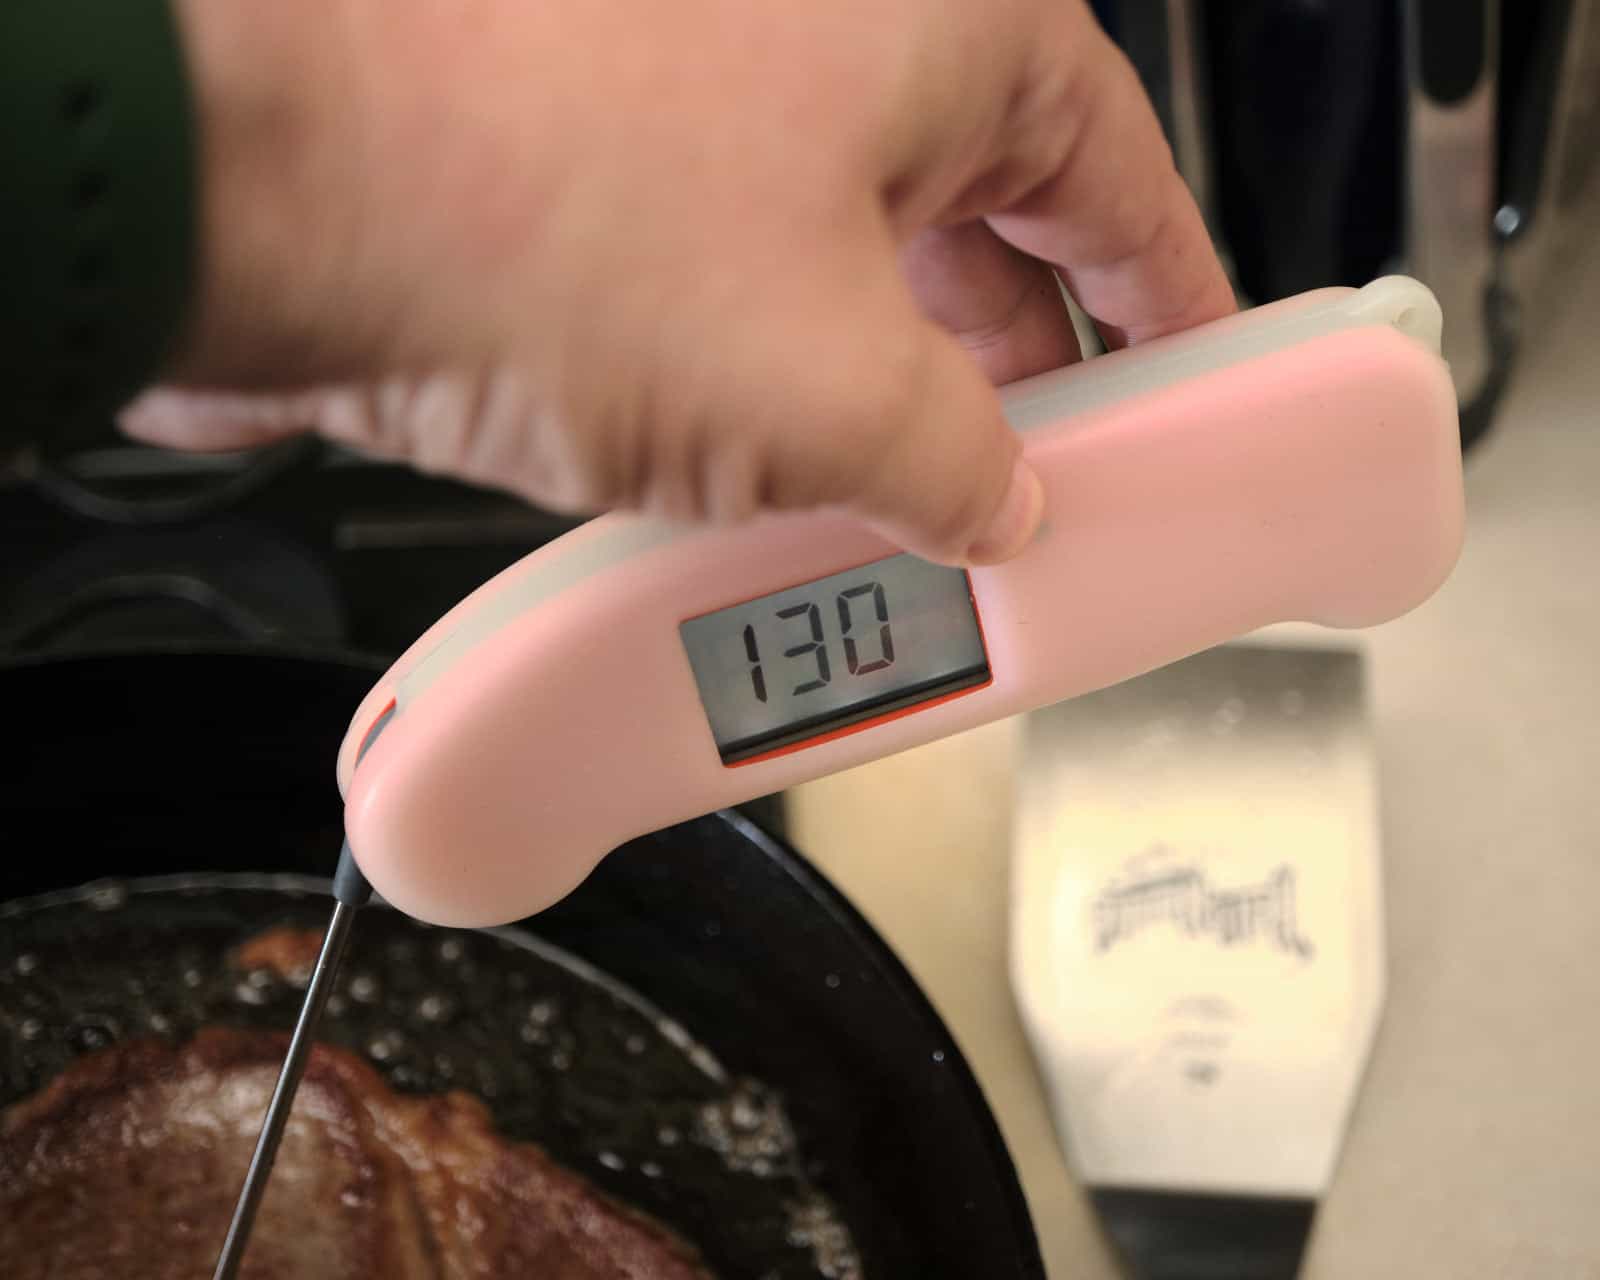 130°F reading on the thermometer